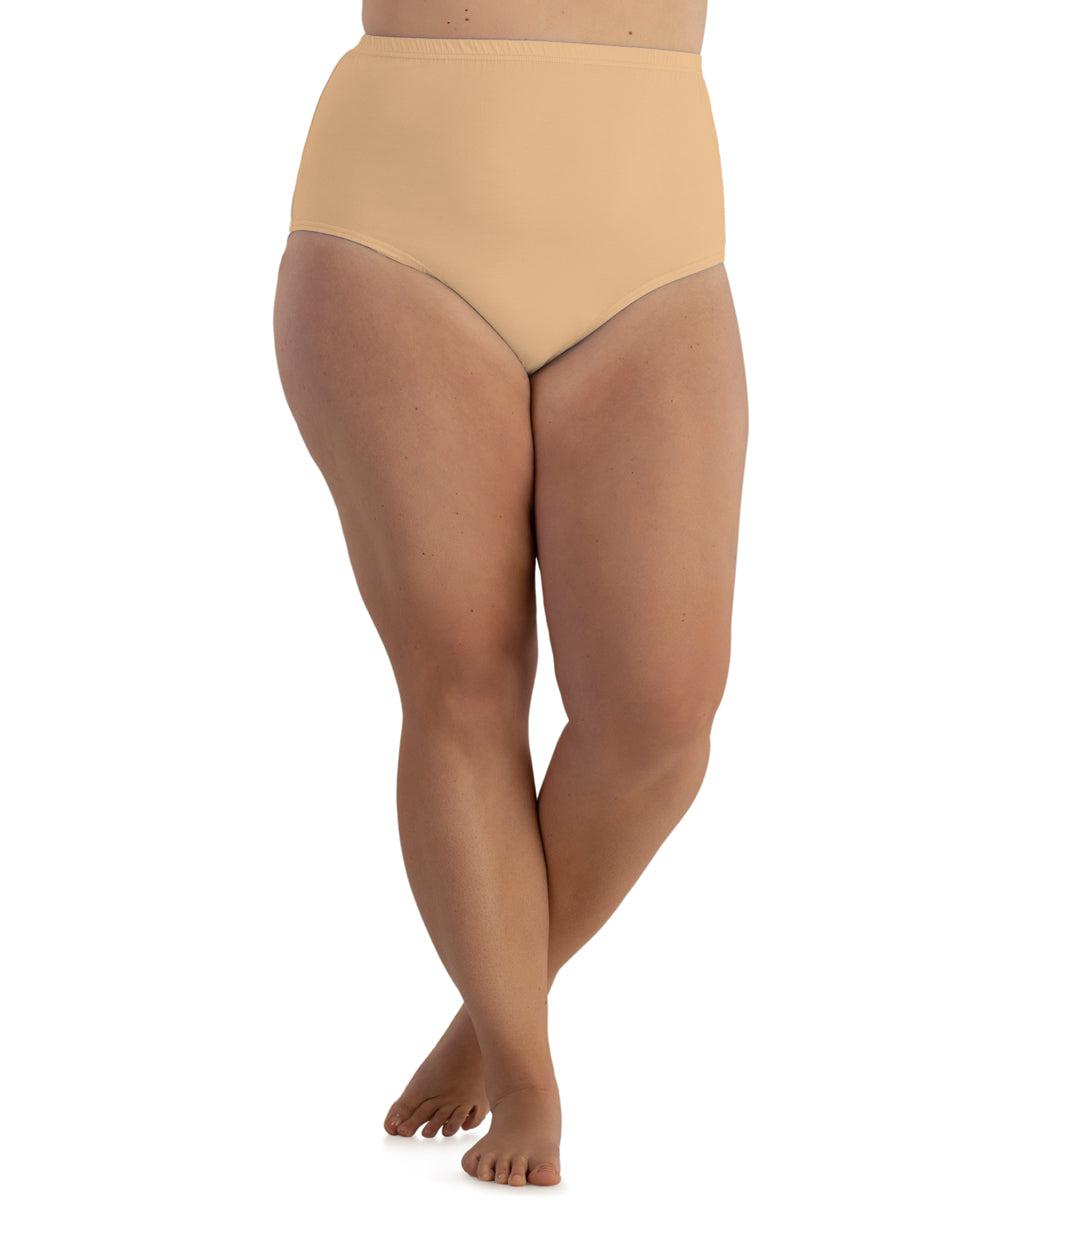 Bottom half of plus sized woman, facing front, wearing JunoActive Junowear Cotton Stretch Classic Full Fit Brief in Taupe. This brief has a high waist fit with conservative leg opening.